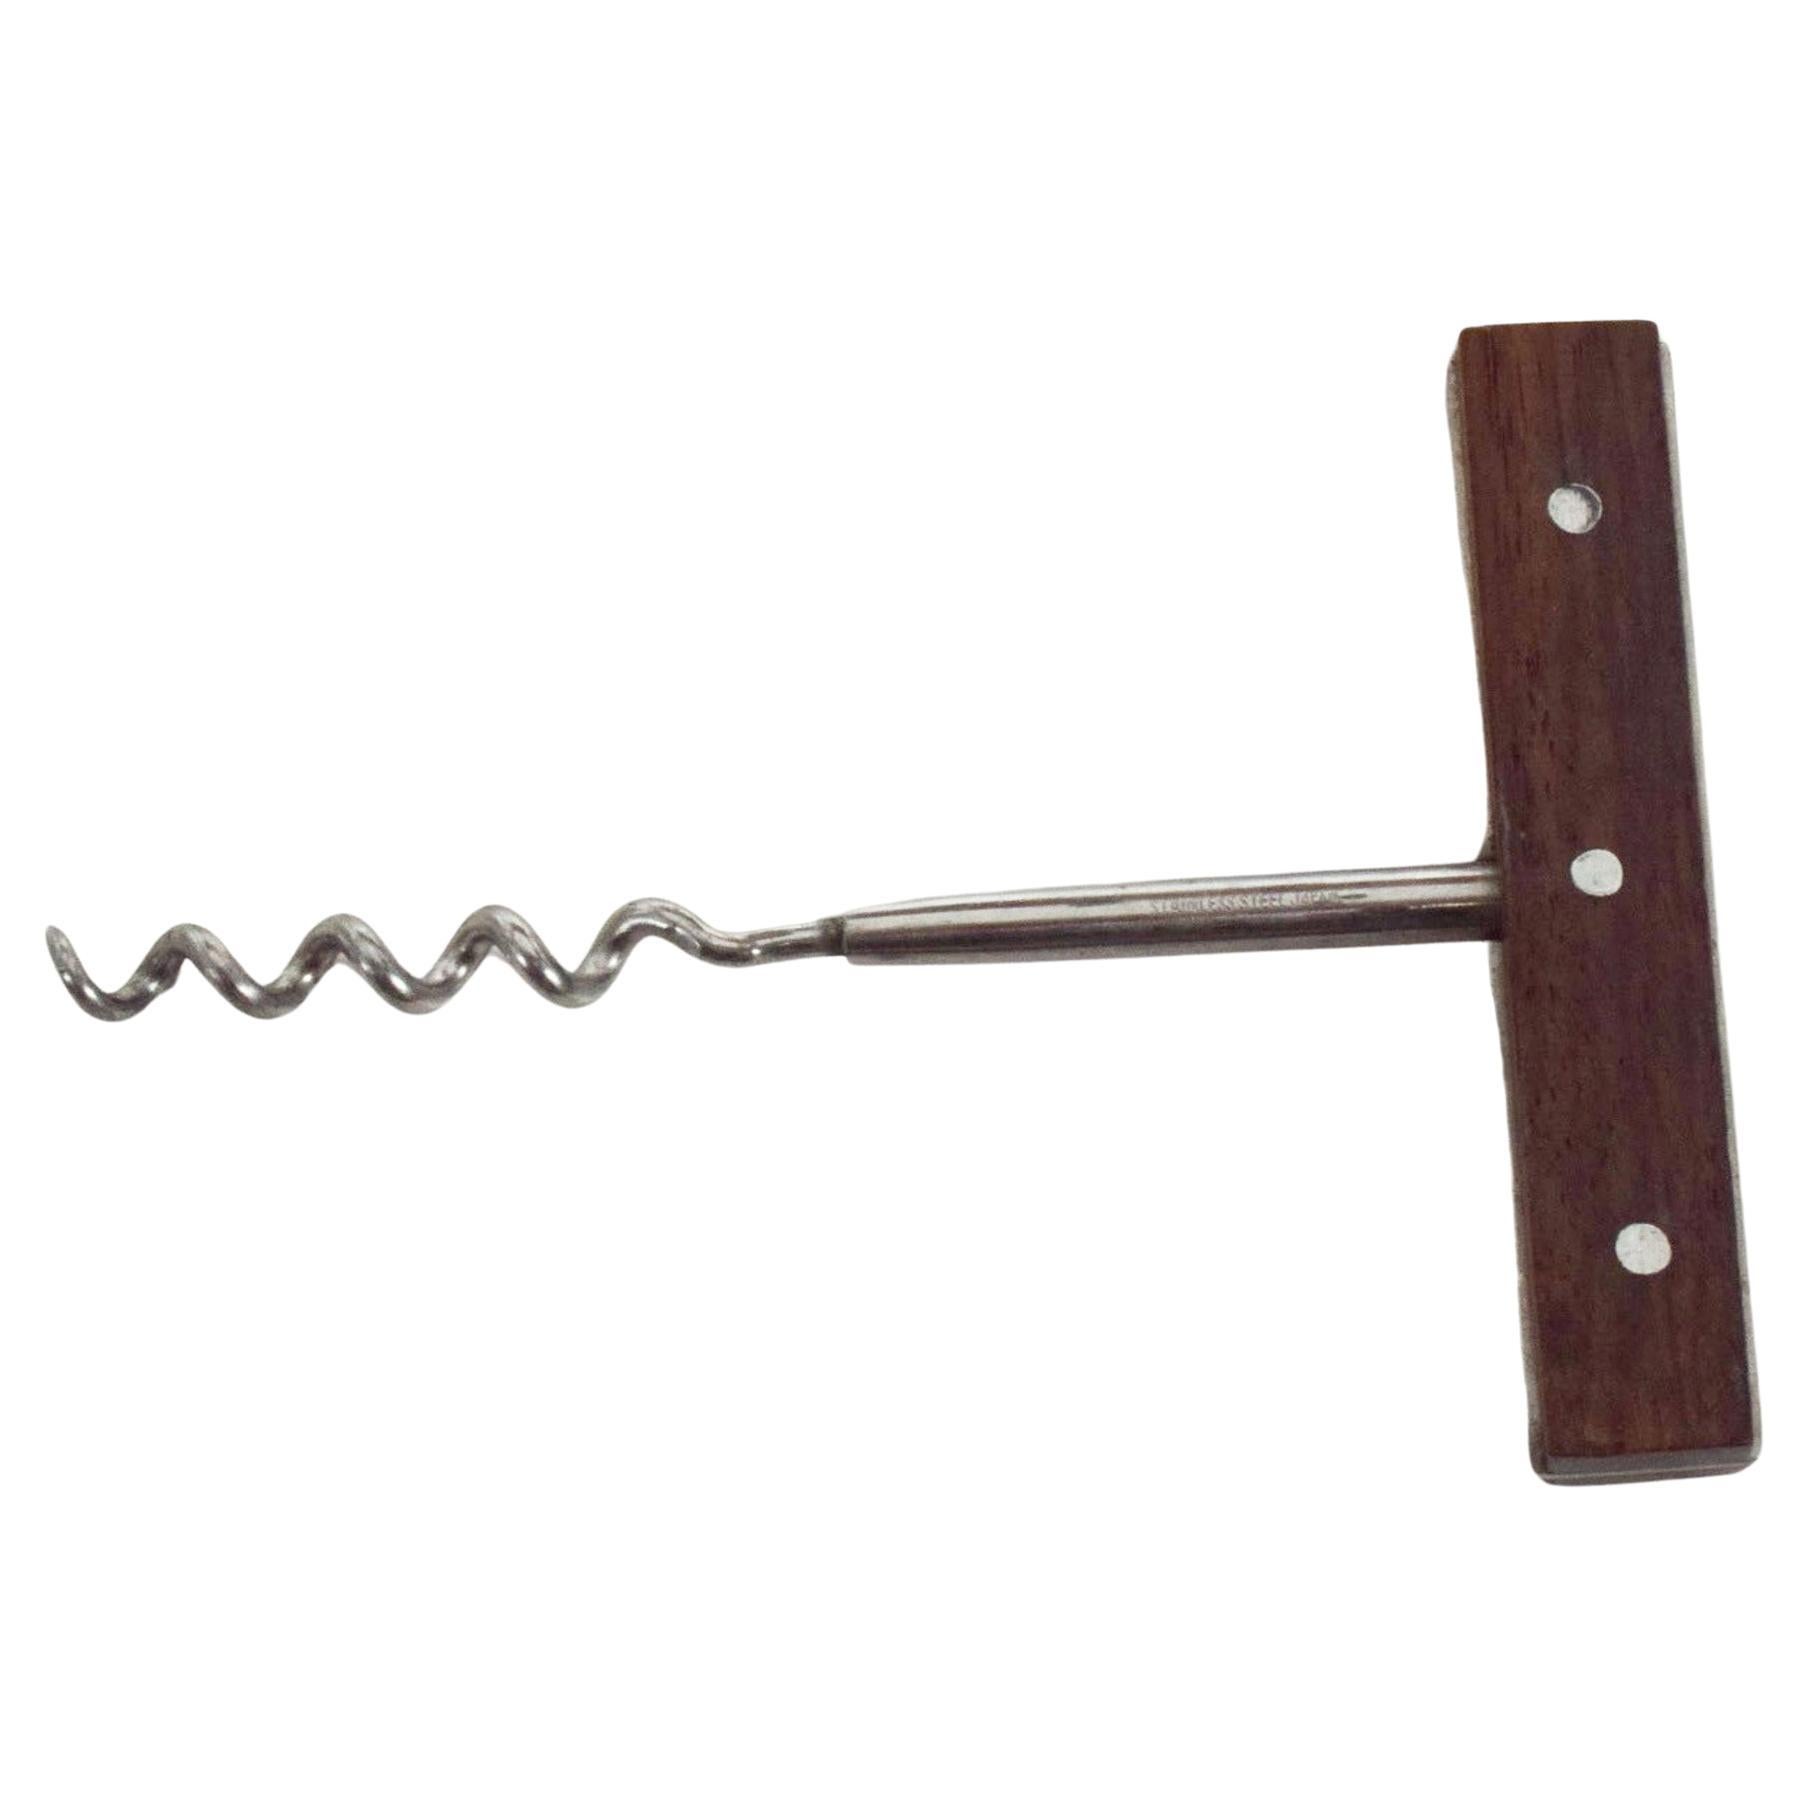 1960s Japanese Wine Bottle Corkscrew Opener in Rosewood and Stainless Steel